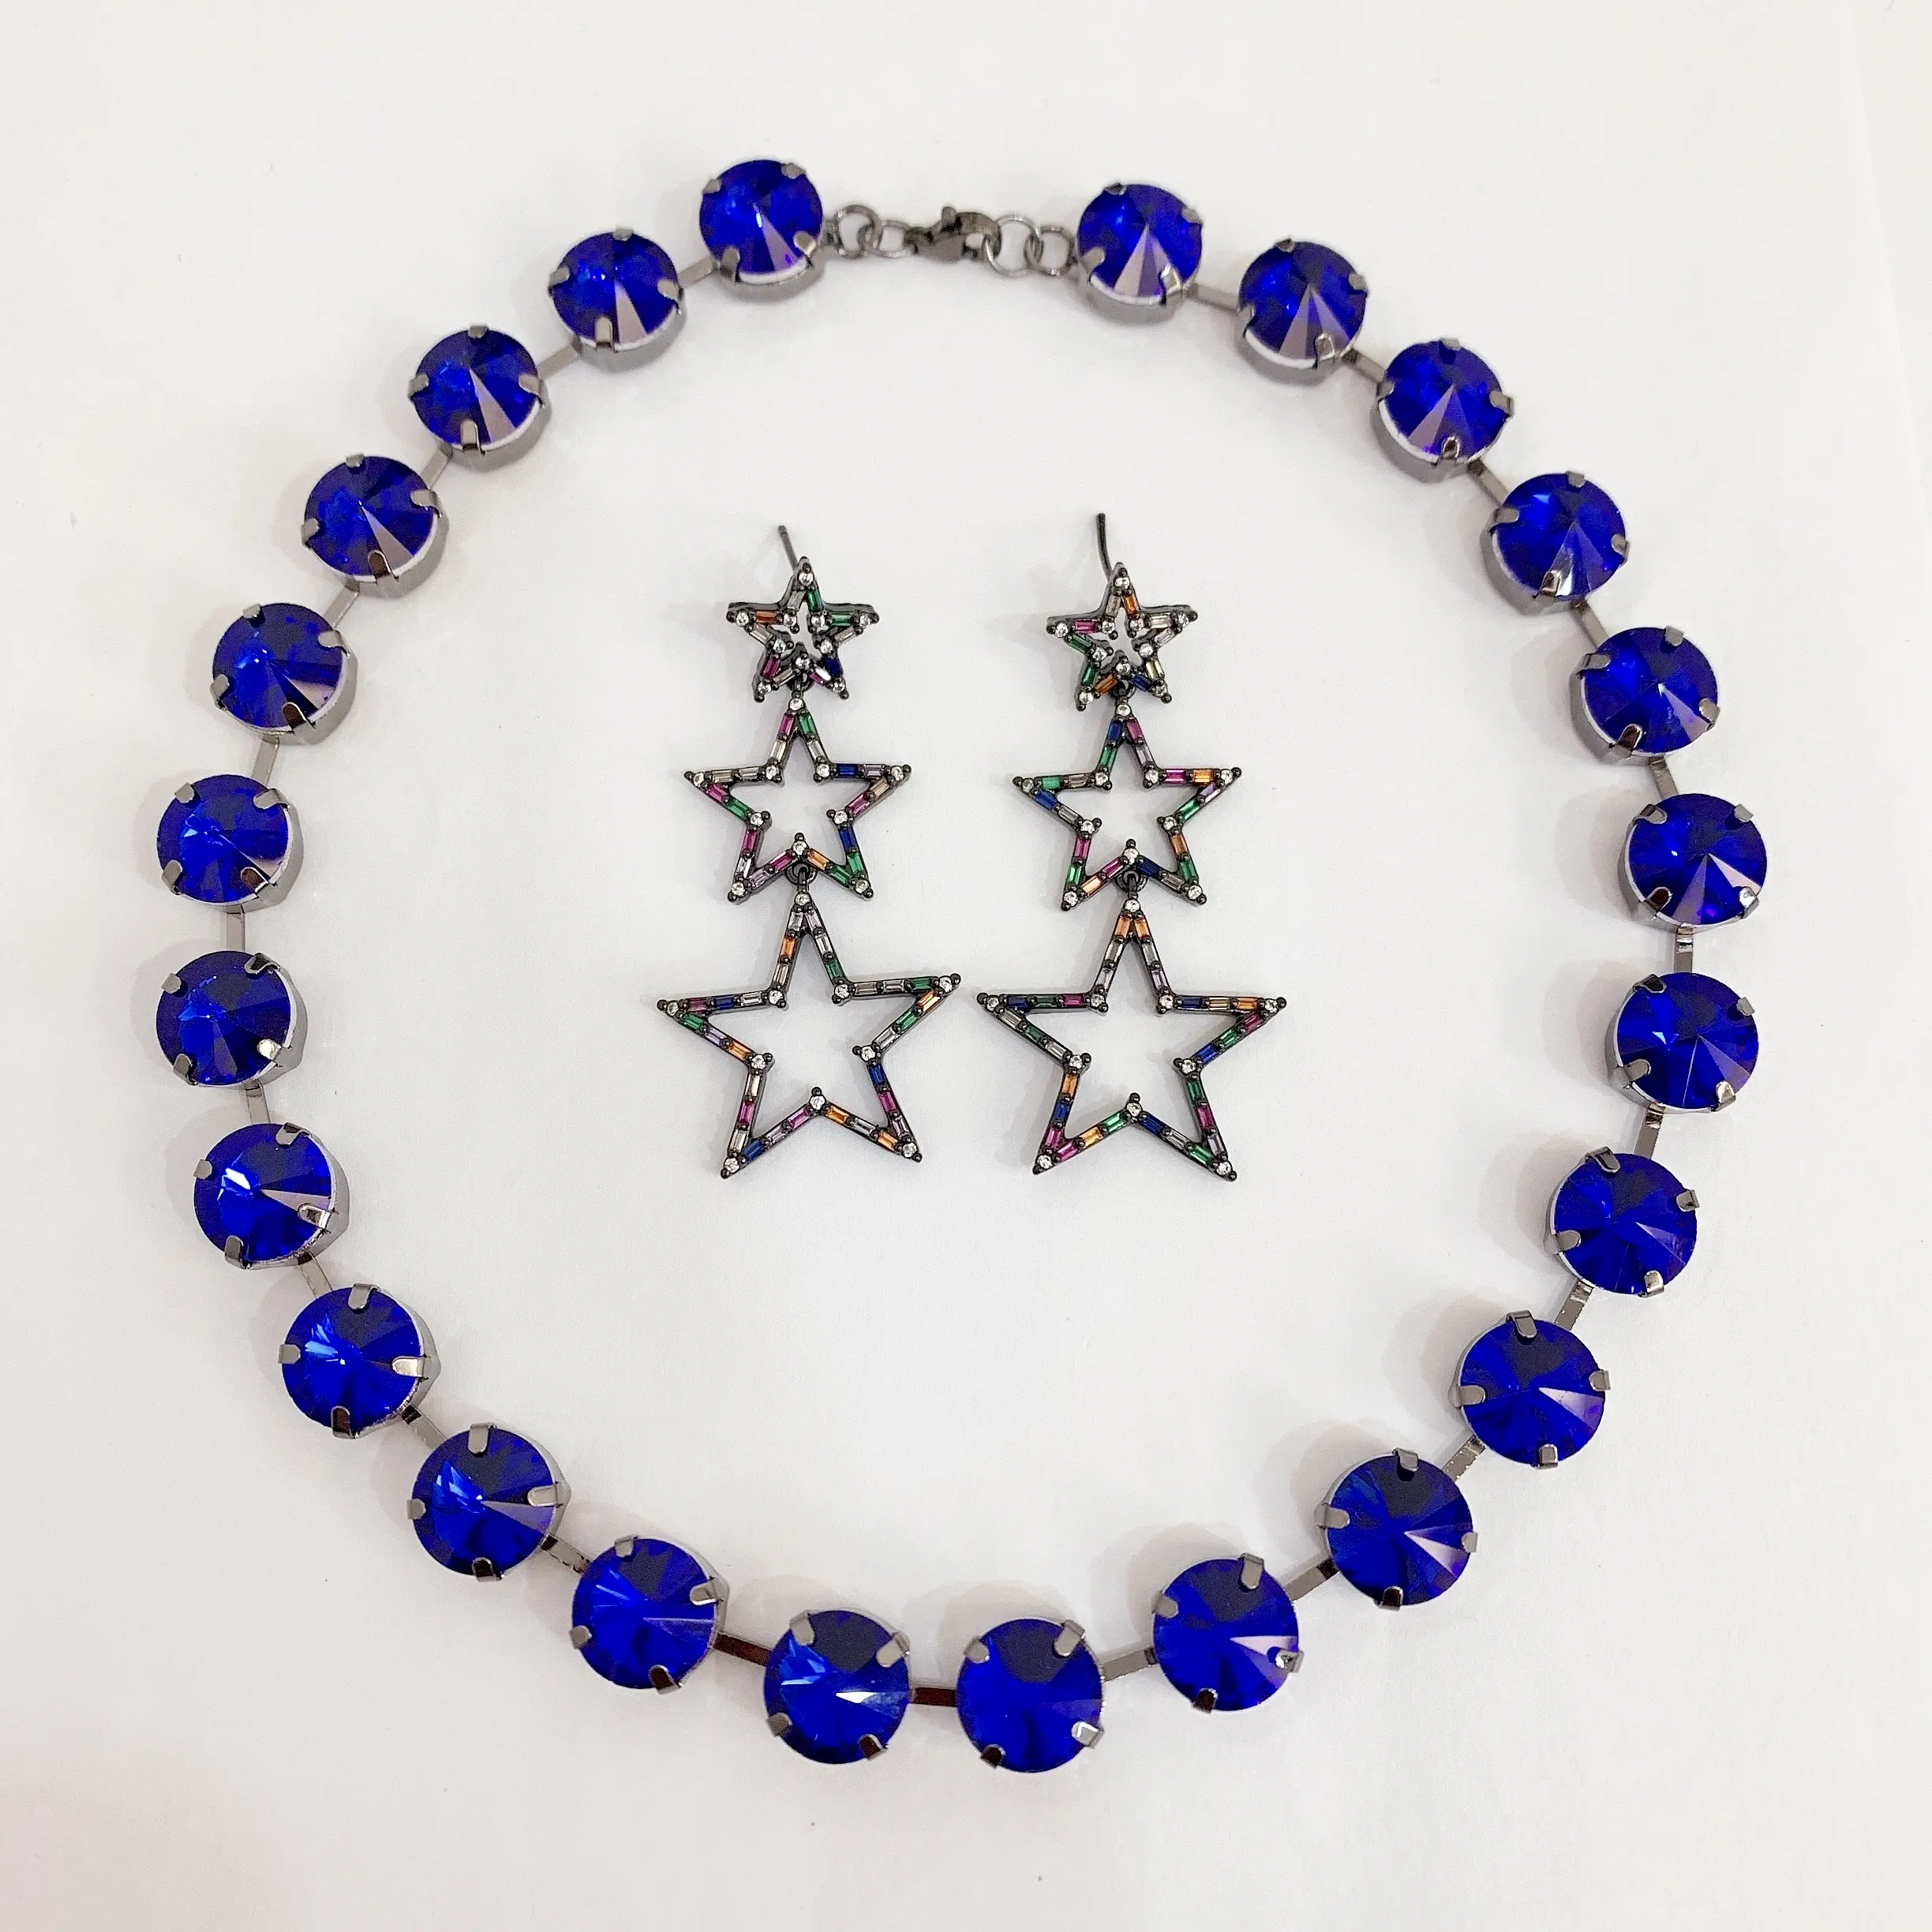 LS-L1725 Hot selling blue full zircon necklaces for party fine jewelry cz necklaces for girl women chocker necklace